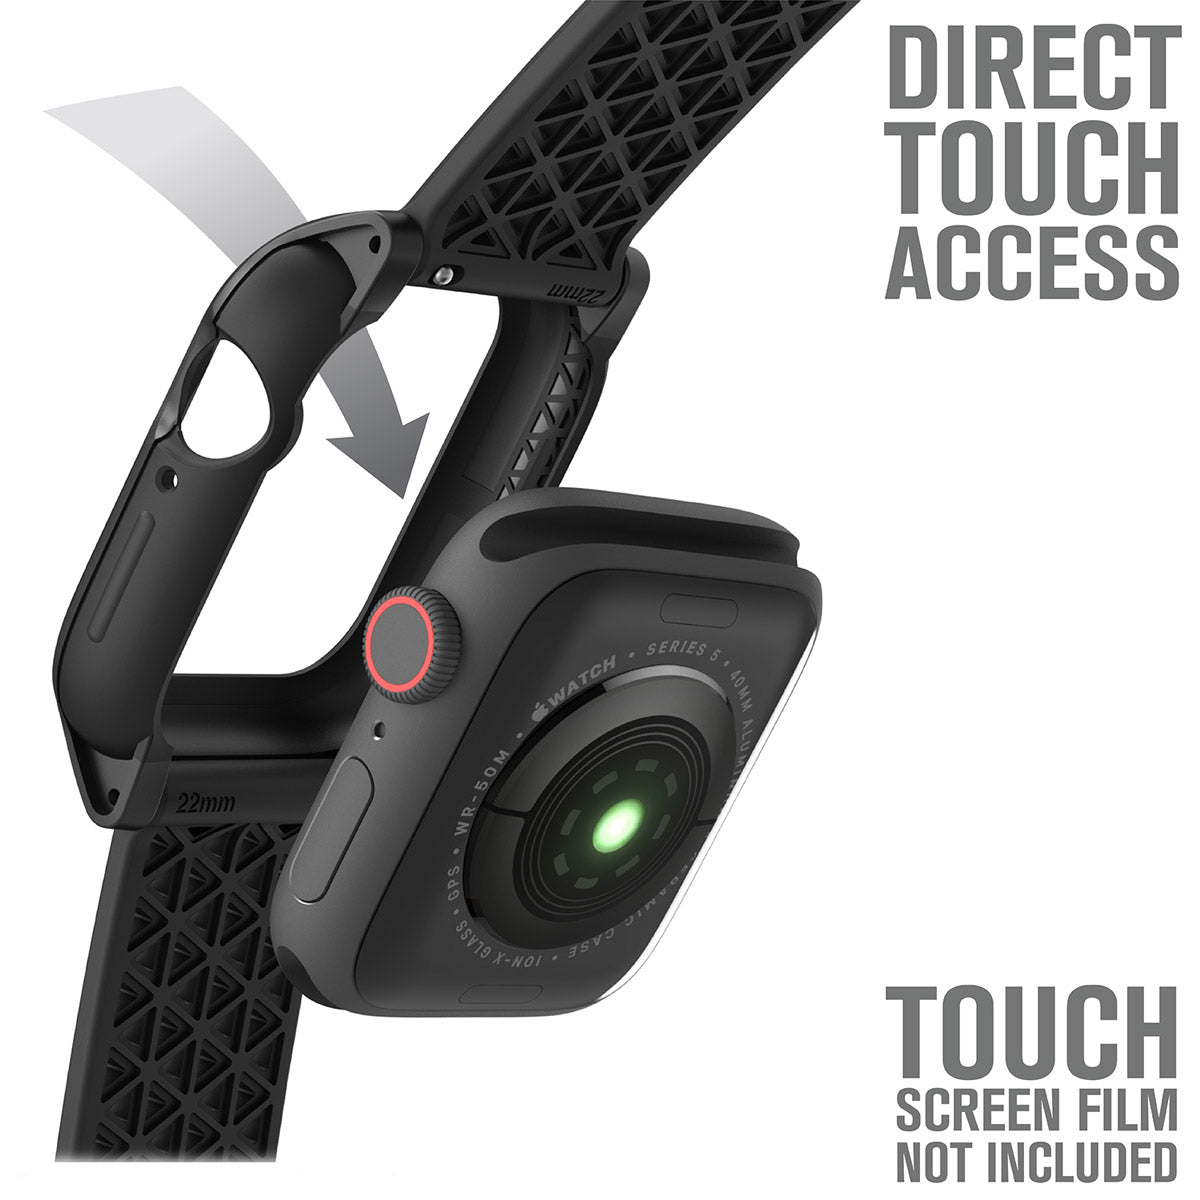 catalyst apple watch series 6 5 4 se gen 21 44mm 40mm impact protection case sport band midnight stealth black the back part of the apple watch and case with direct touch access text reads direct touch access touch screen film not included